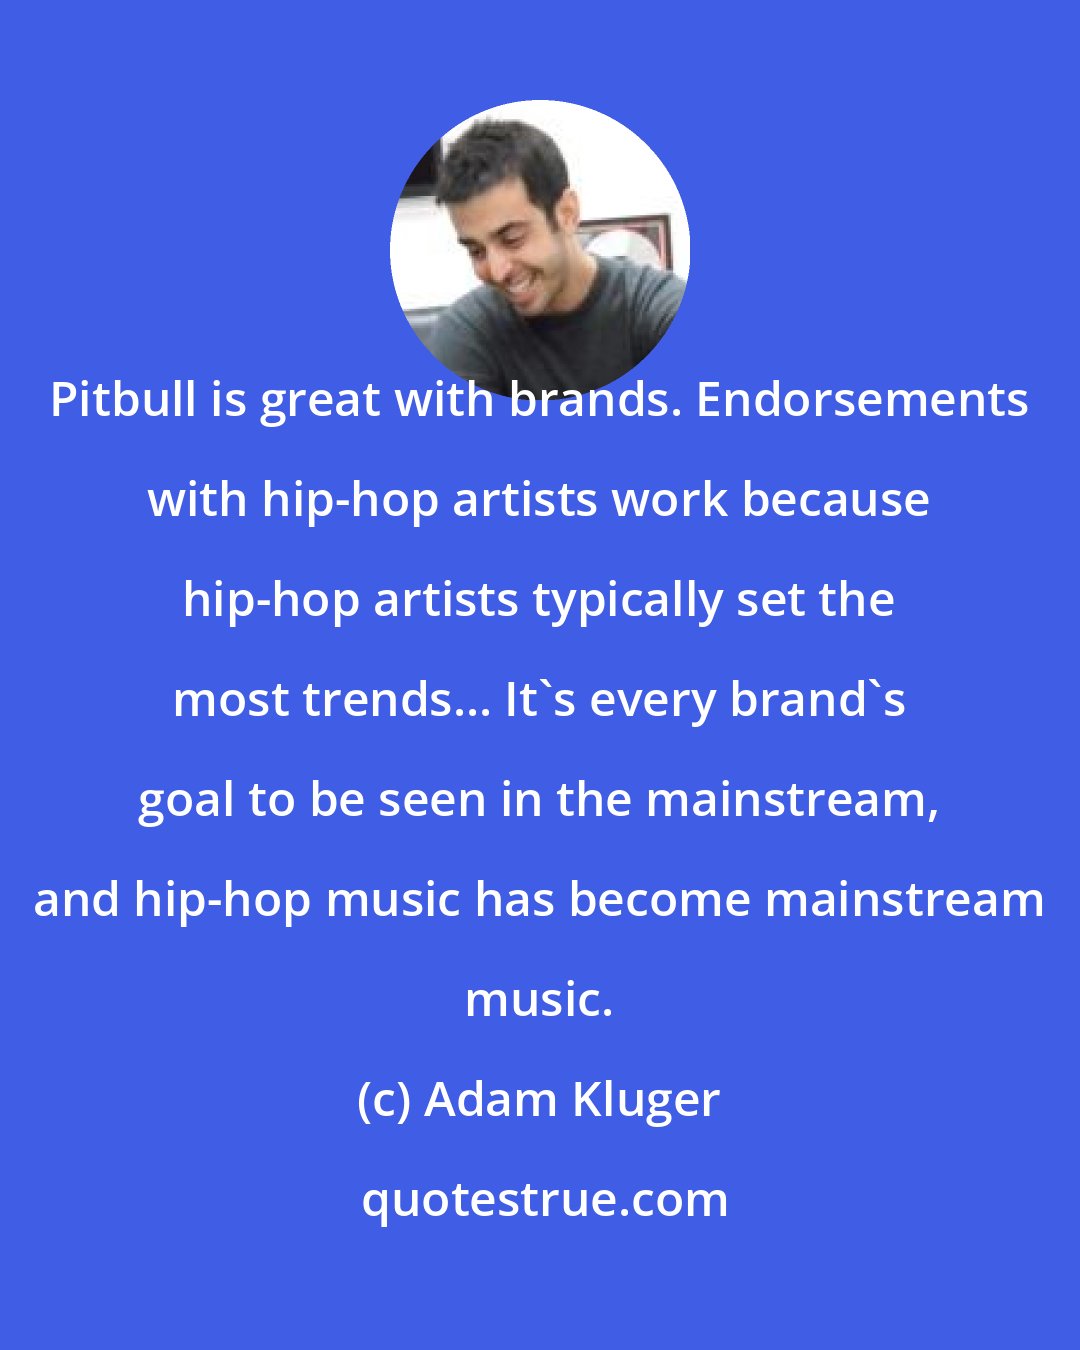 Adam Kluger: Pitbull is great with brands. Endorsements with hip-hop artists work because hip-hop artists typically set the most trends... It's every brand's goal to be seen in the mainstream, and hip-hop music has become mainstream music.